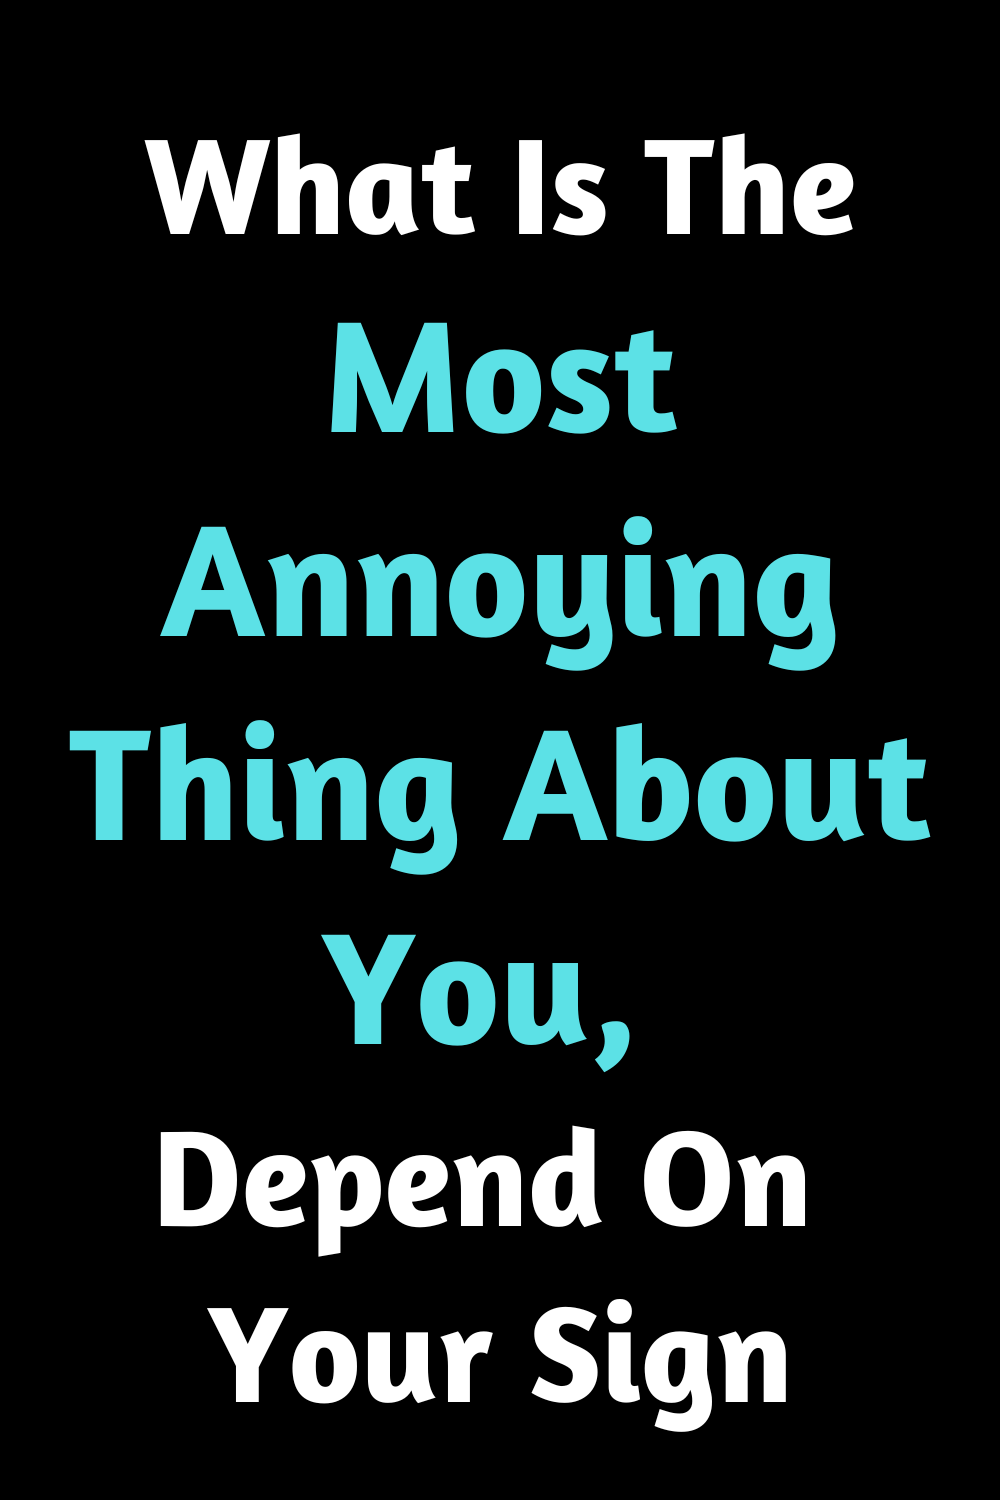 What Is The Most Annoying Thing About You, Depend On Your Sign